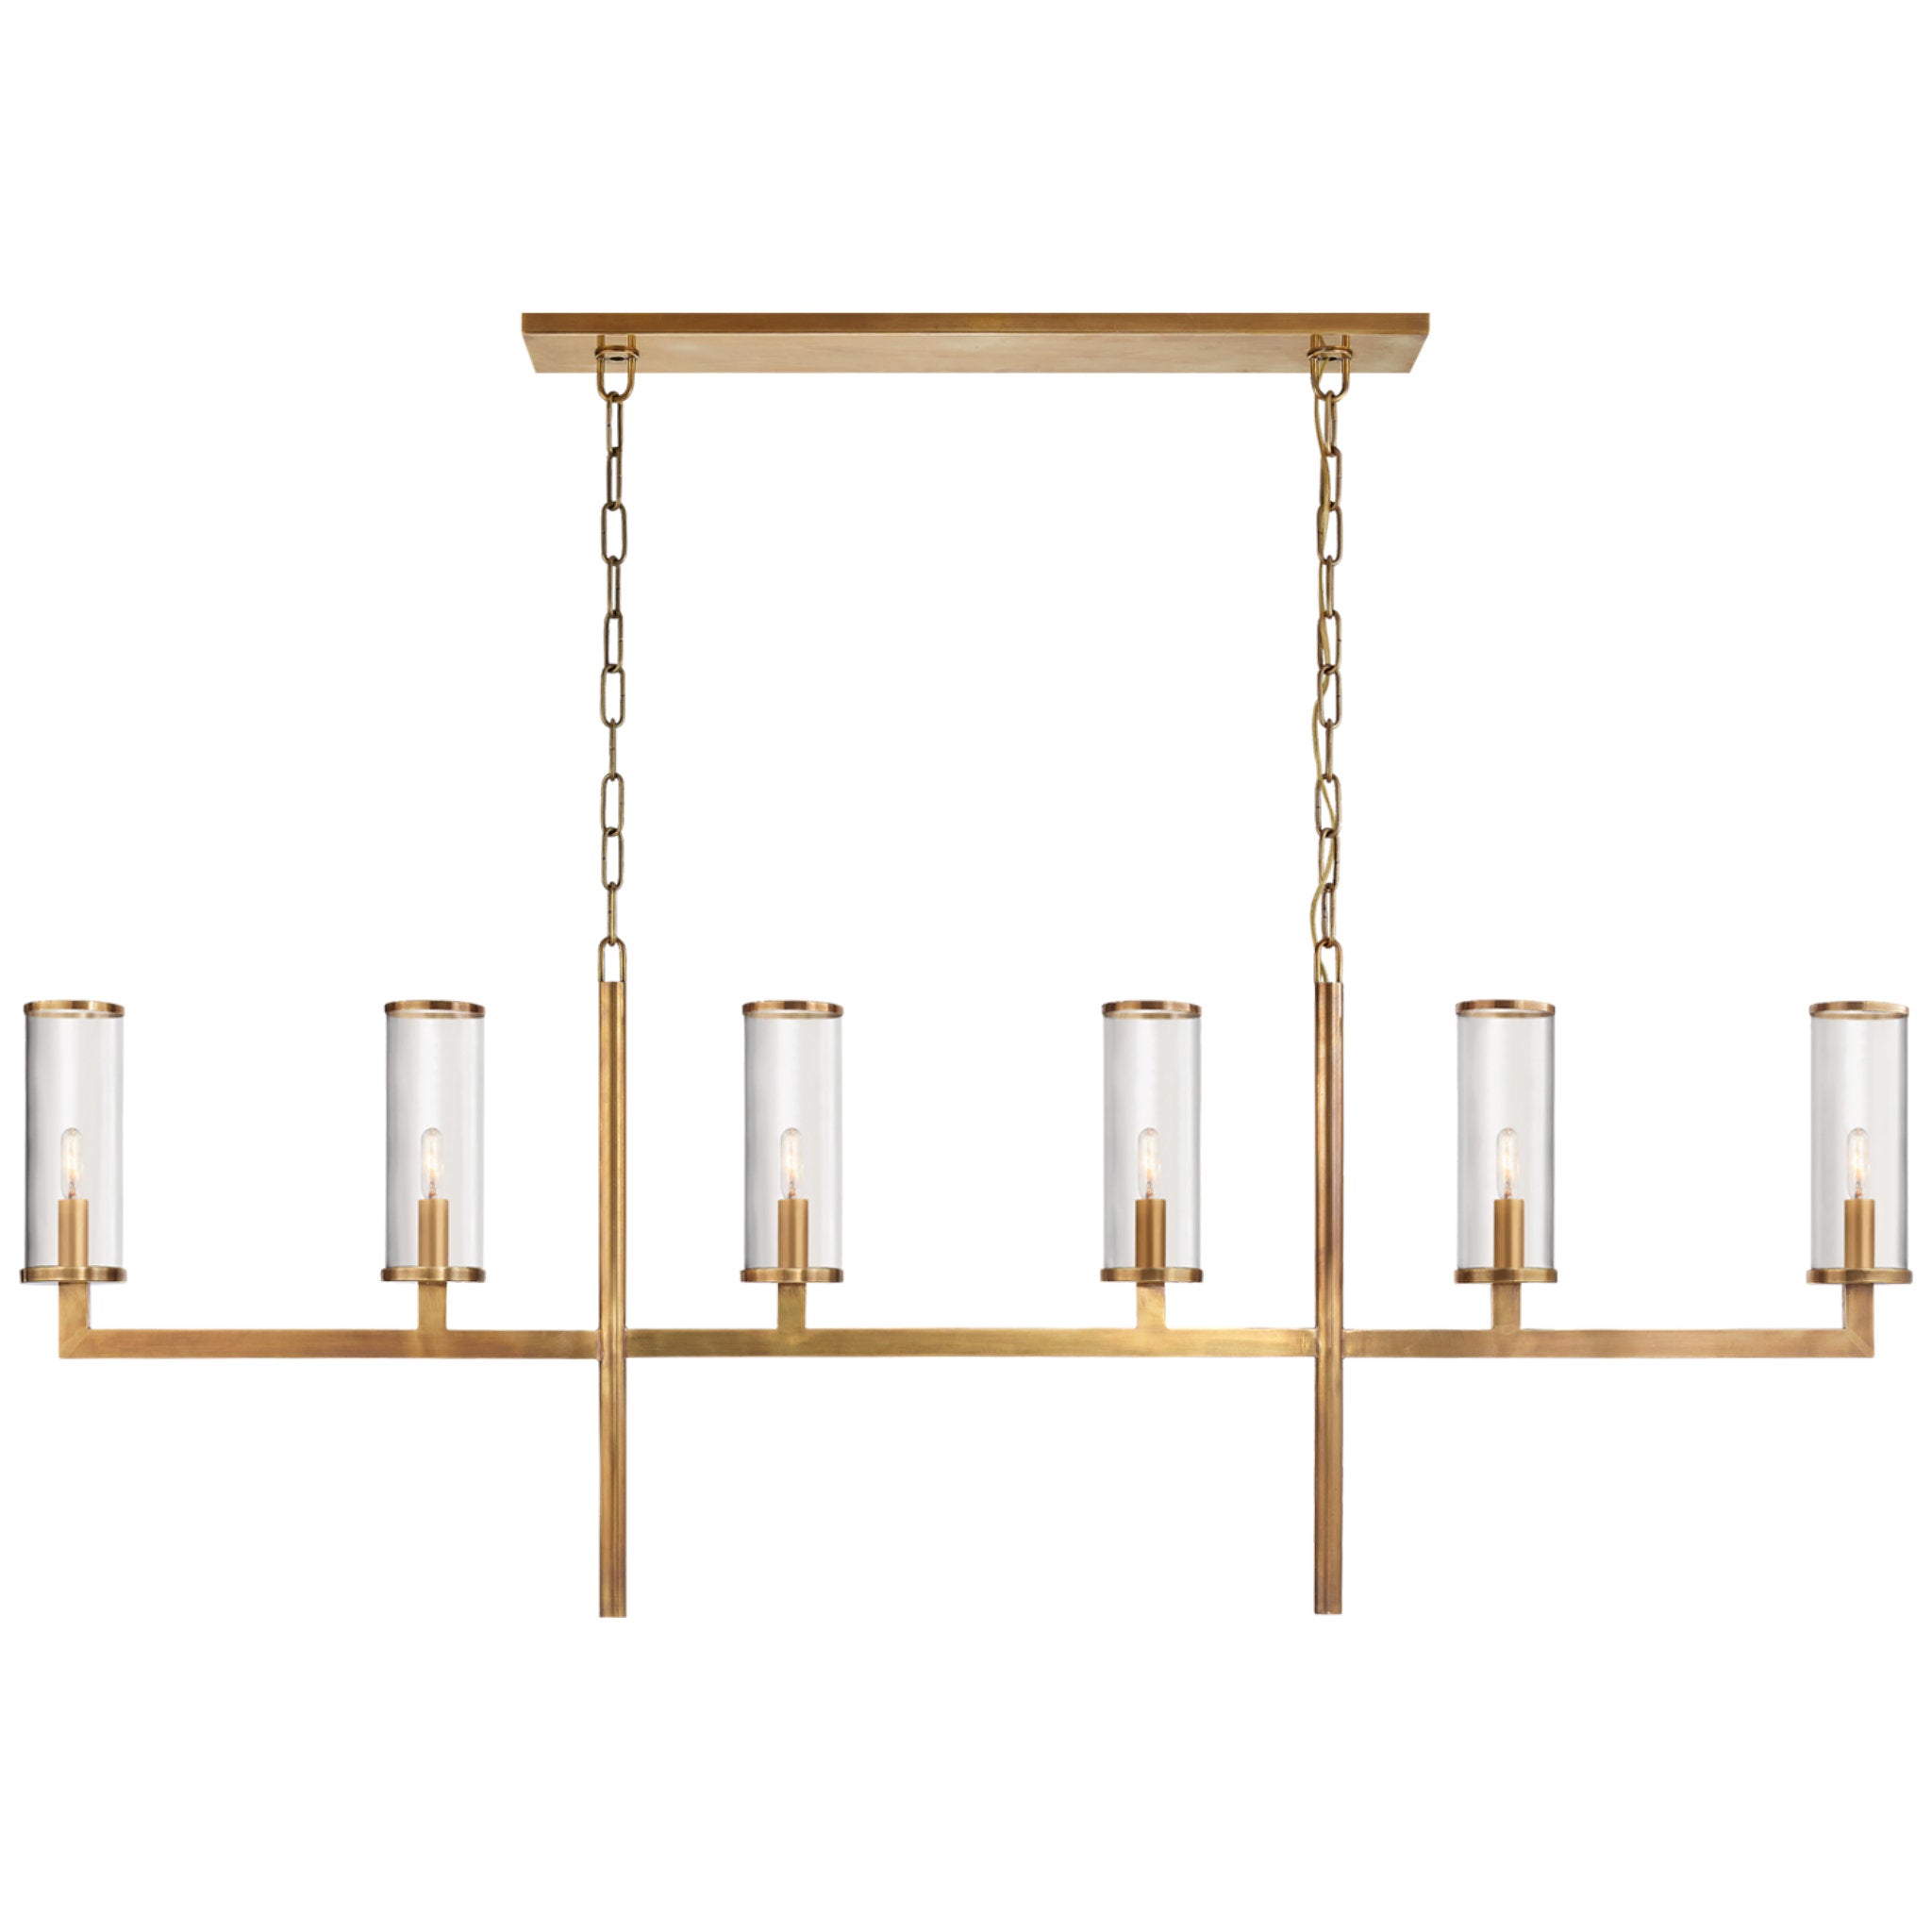 Kelly Wearstler Liaison Large Linear Chandelier in Antique-Burnished Brass with Clear Glass